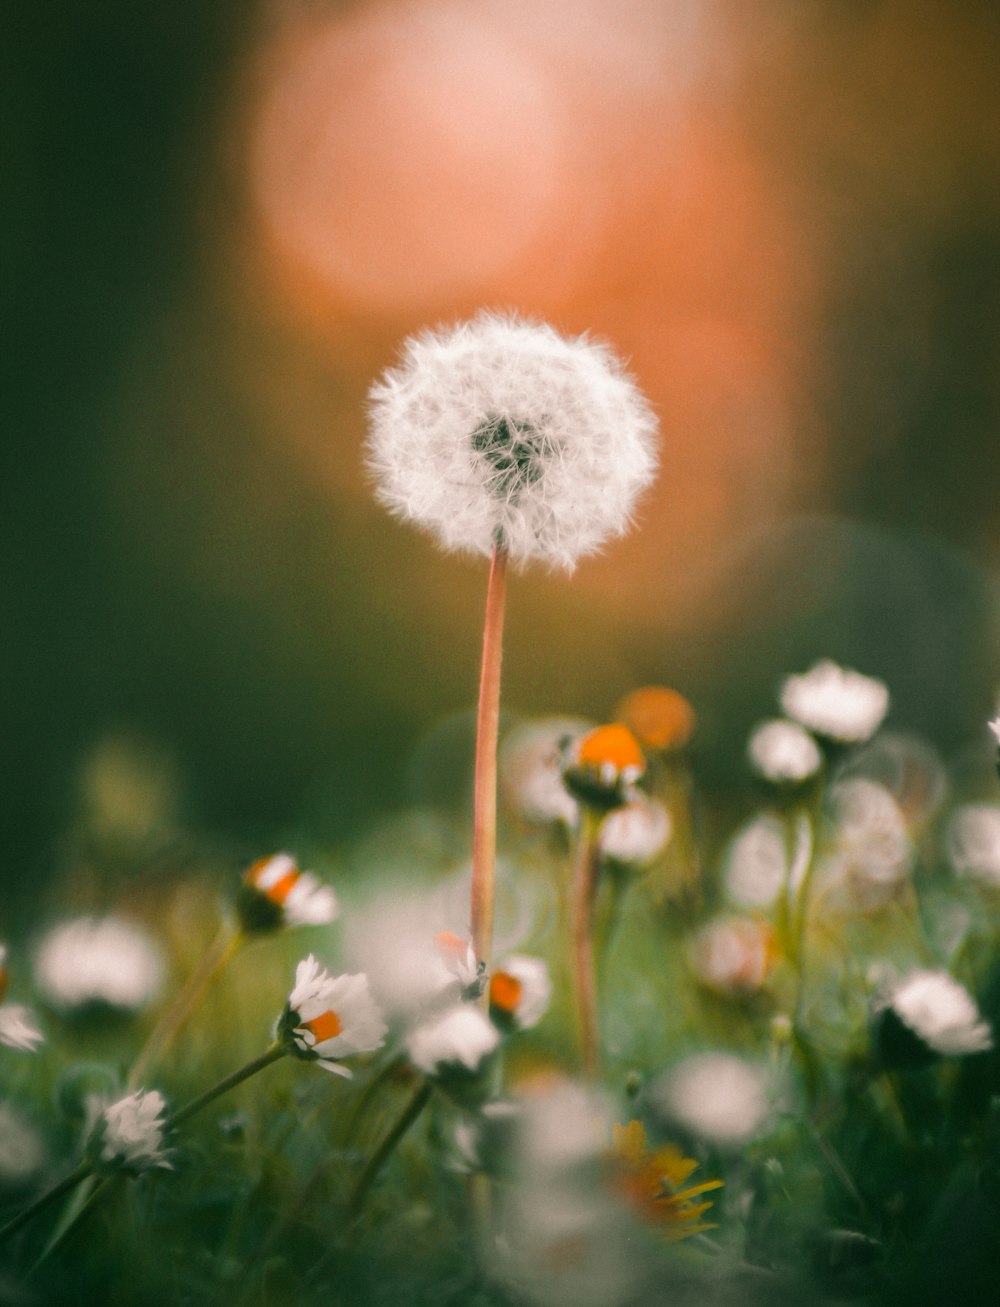 a close up of a dandelion in a field of flowers